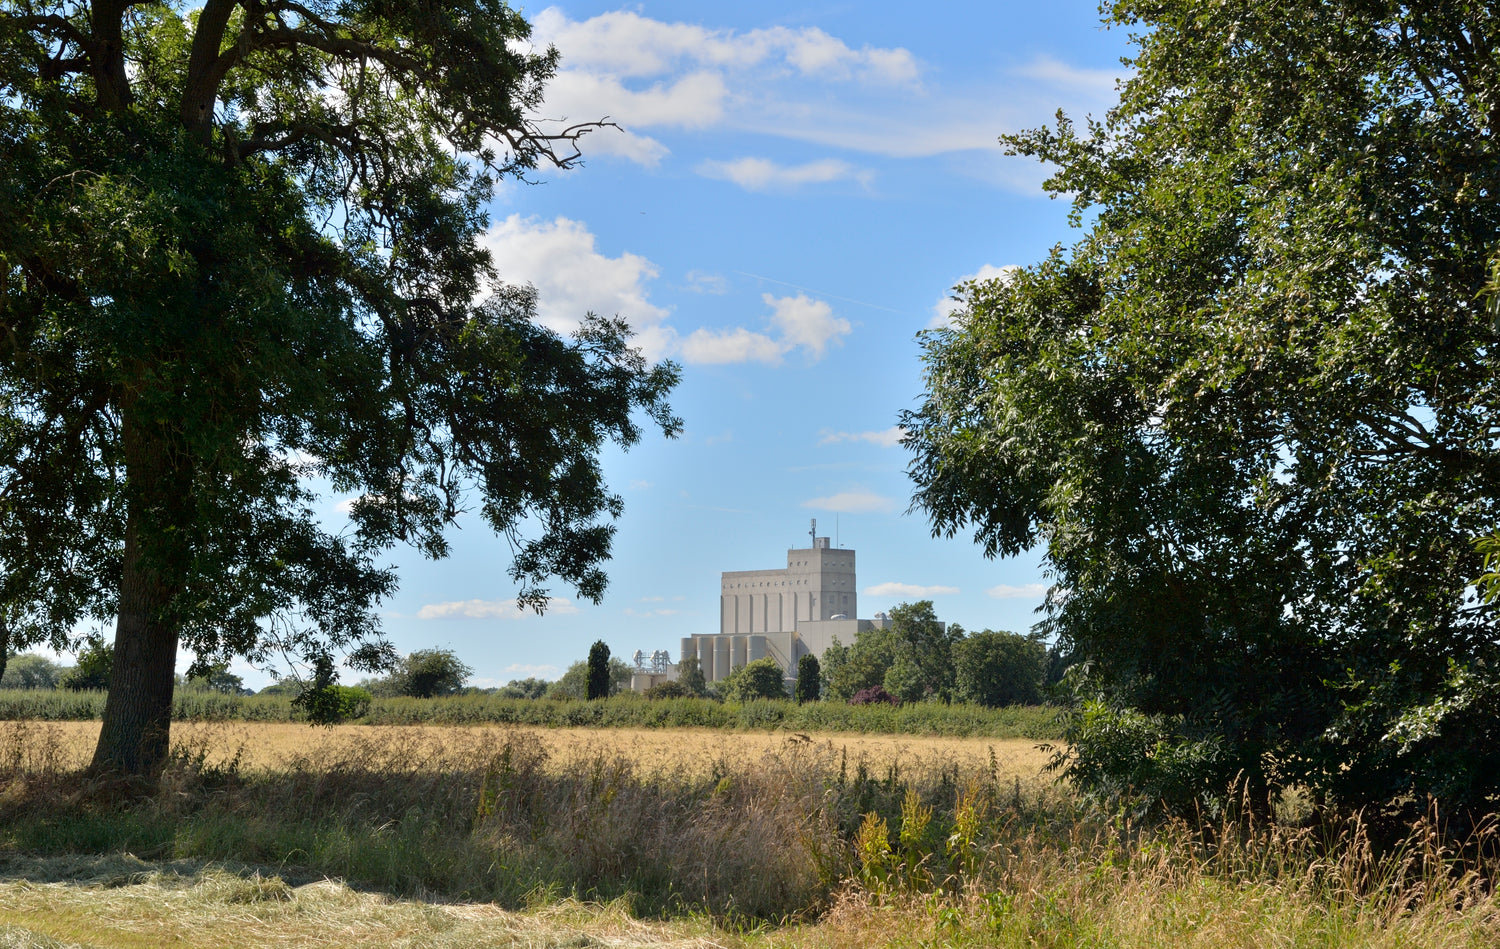 Beautiful view of Heygate Flour Millers from behind trees and fields